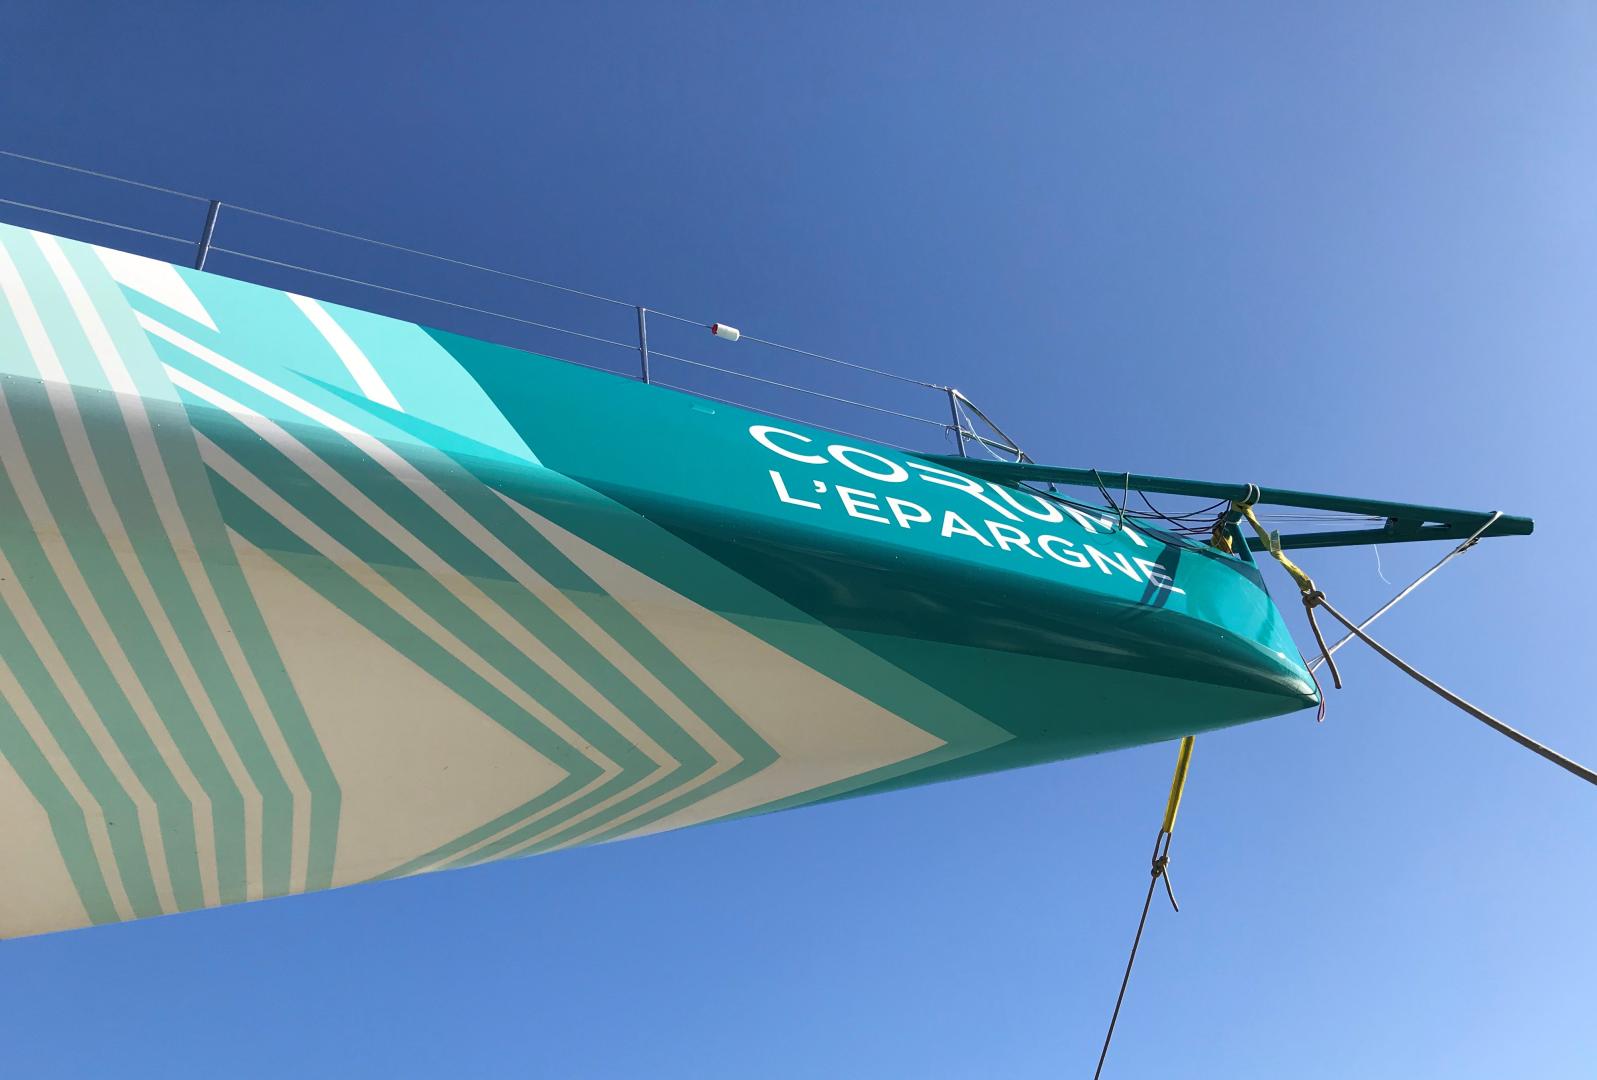 Nautix has a very distinguished client list. Its specially formulated antifouling, appendage, deck and cockpit paints were used on 80 per cent of the yachts in the 2020 Vendée Globe fleet.